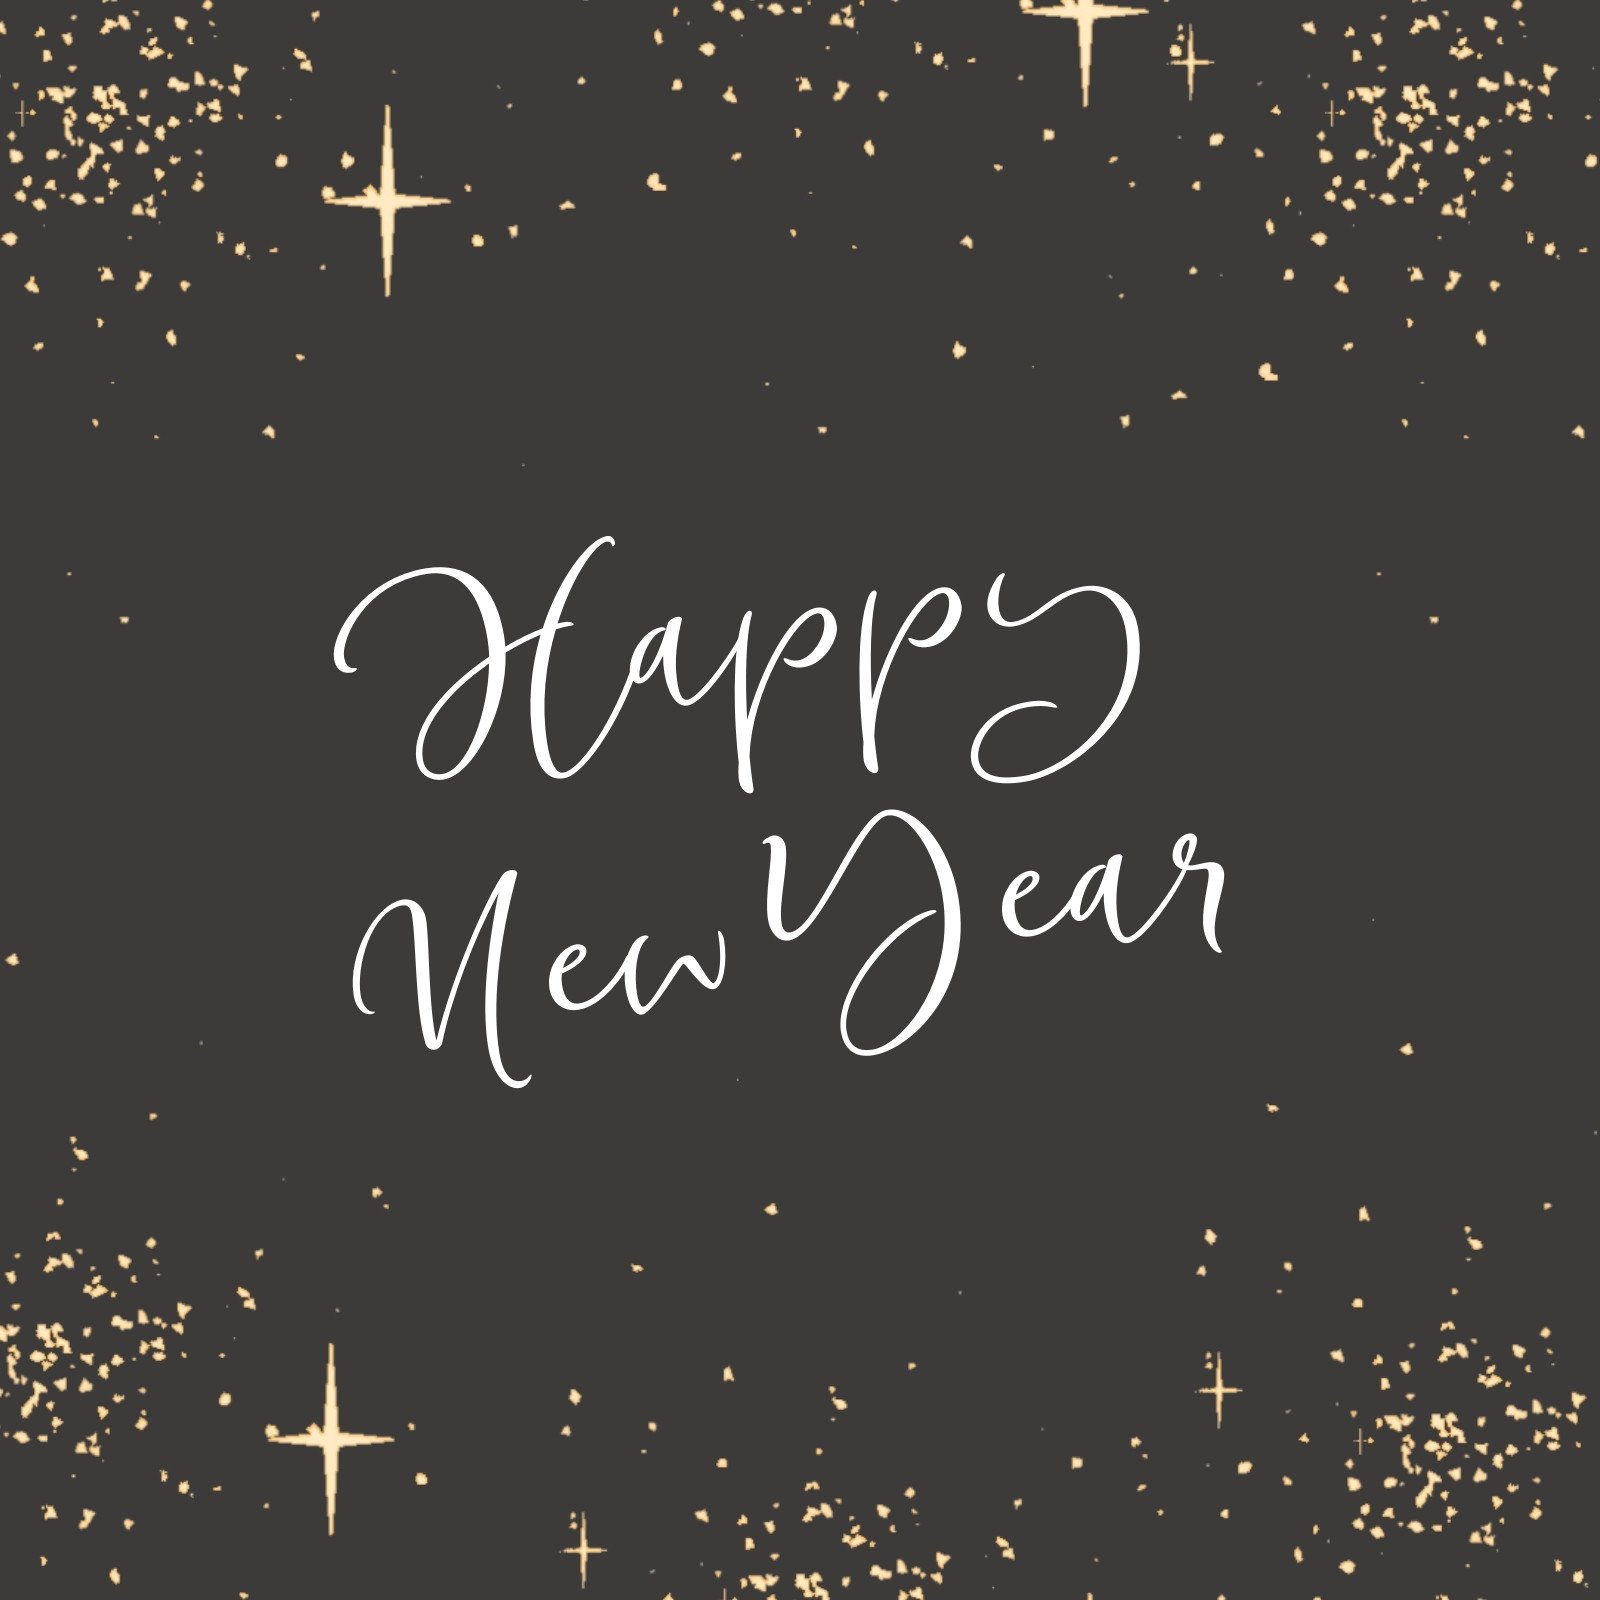 Free customizable New Year Instagram post templates | Canva